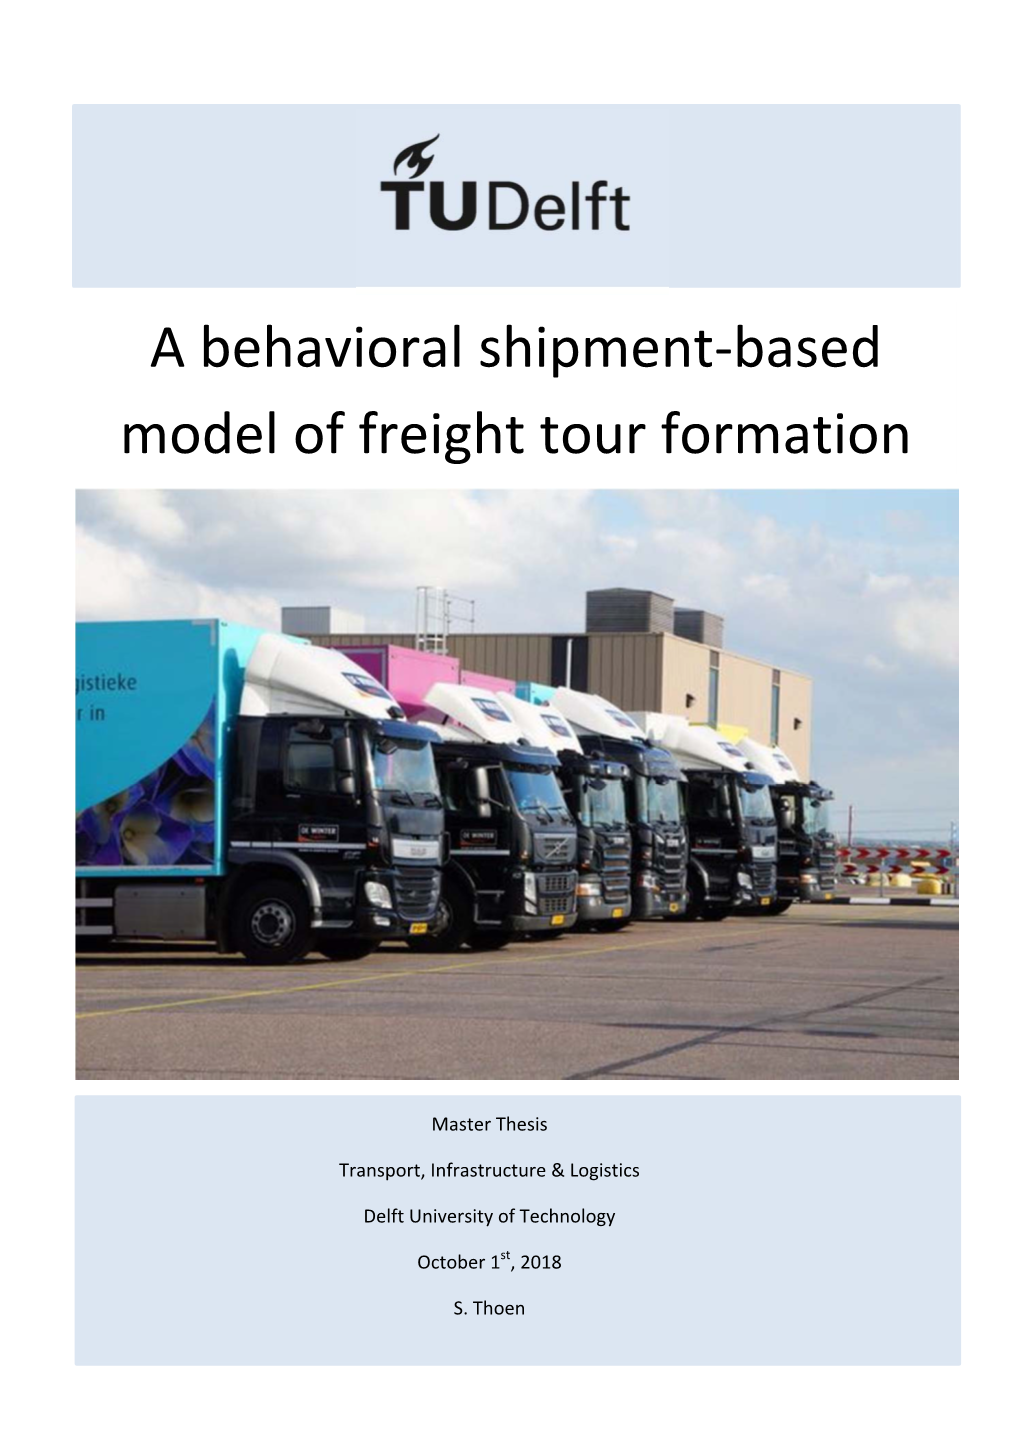 A Behavioral Shipment-Based Model of Freight Tour Formation